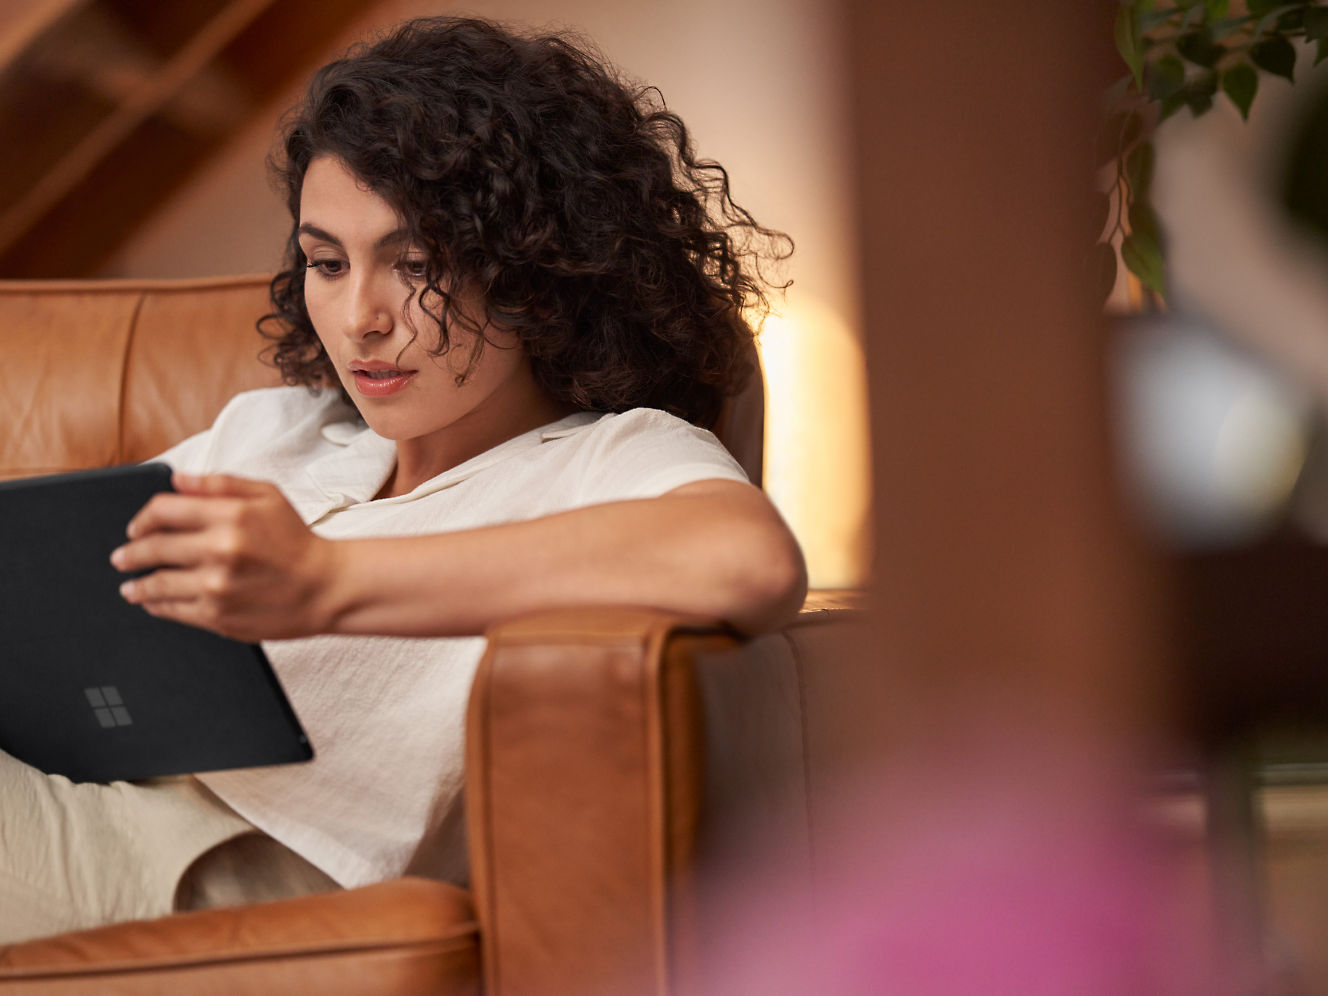 A woman with curly hair intently reading on a tablet while seated in a brown leather armchair indoors.